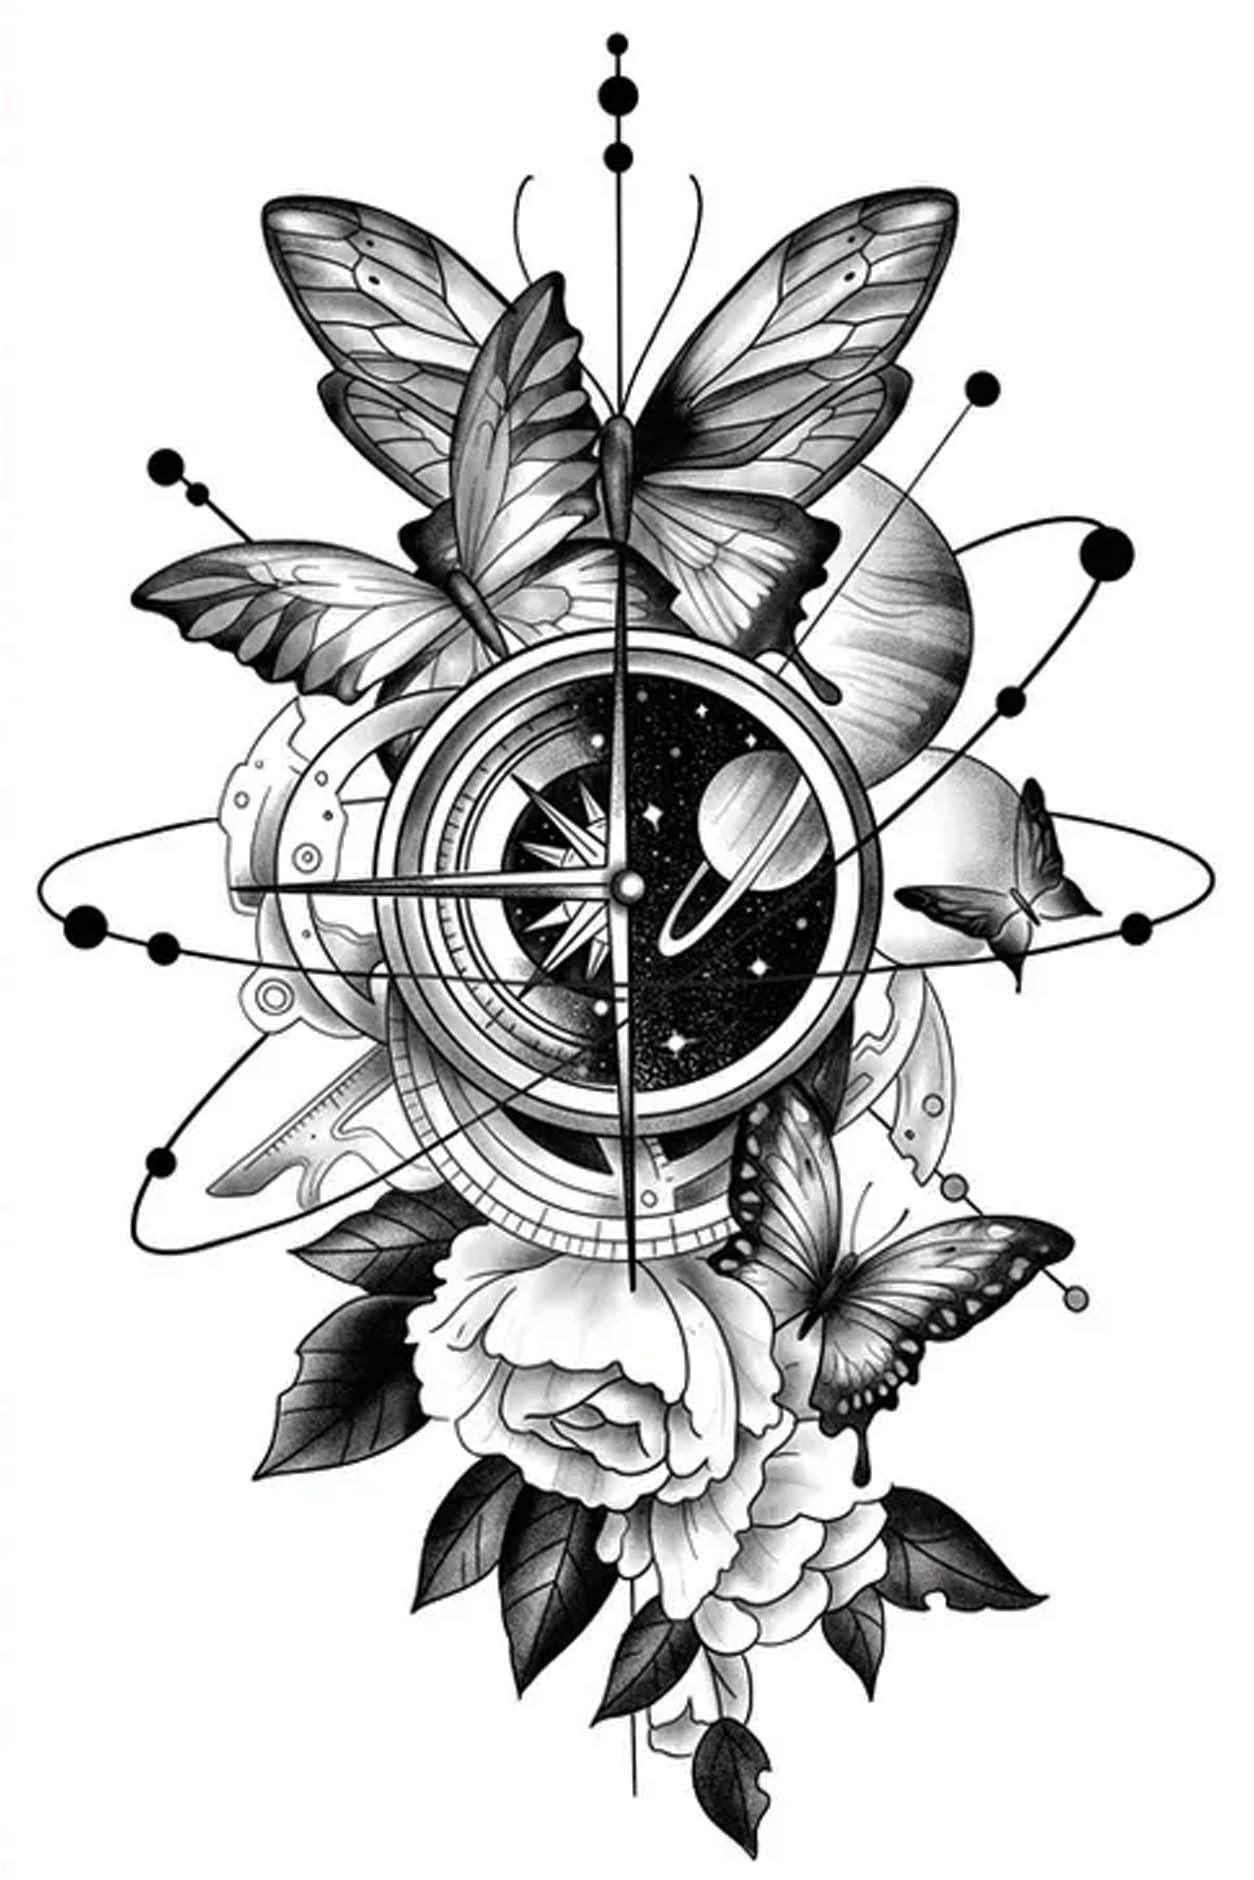 Butterflies are a guiding light that directs the highest spiritual truth, and the compass points us in the right direction. The electron's encircle the entire solar system creating a universal special picture of continuous life. This is a complex piece with many ingredients including planet Saturn and clock part and space.